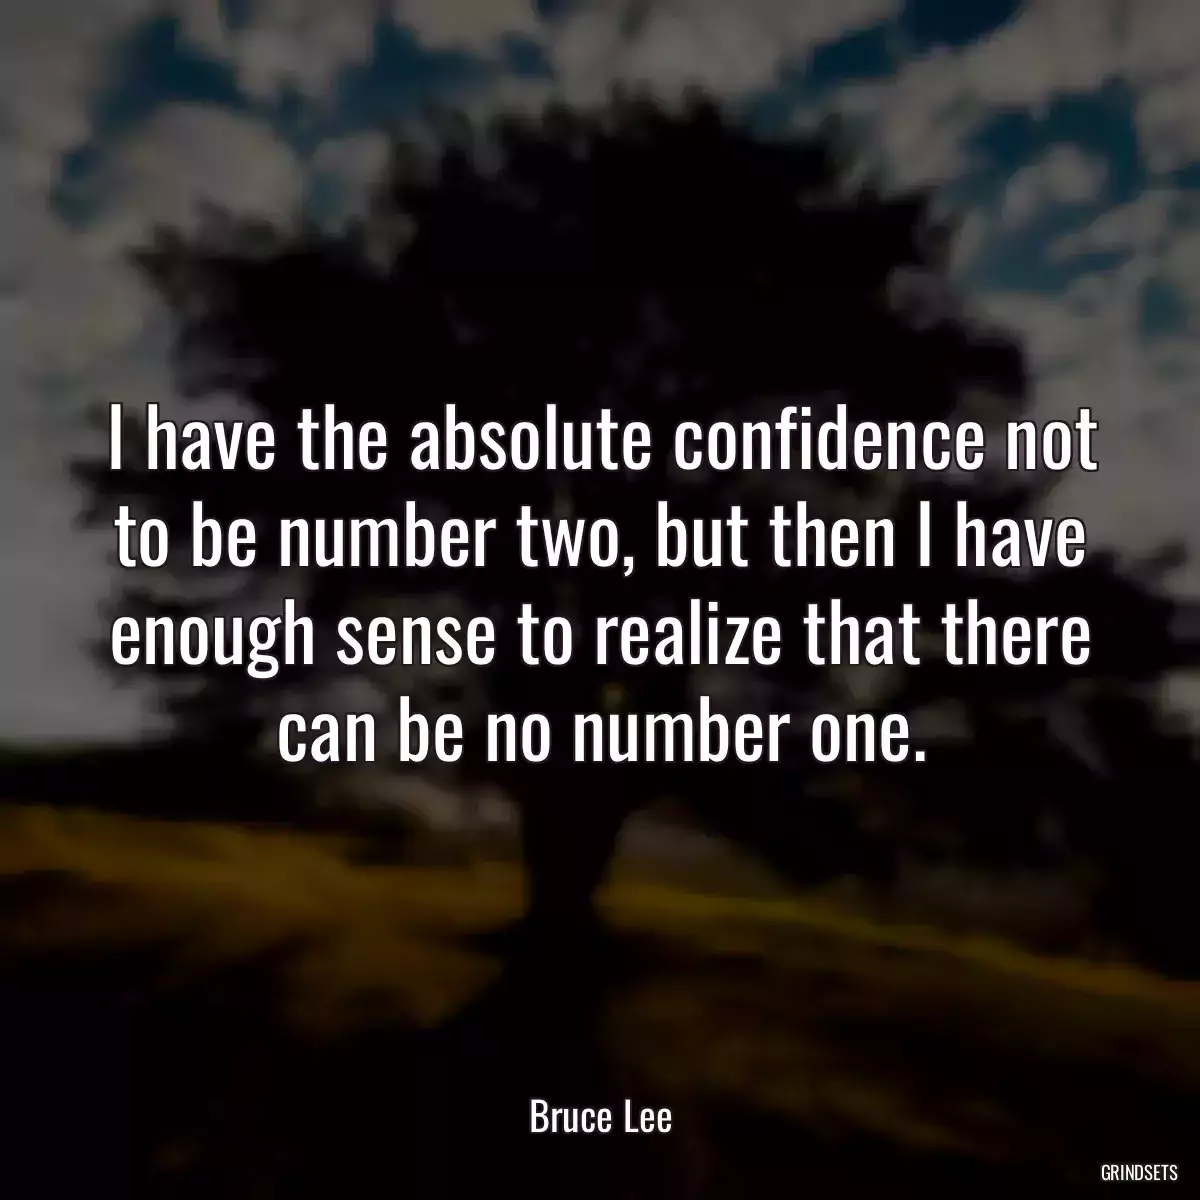 I have the absolute confidence not to be number two, but then I have enough sense to realize that there can be no number one.